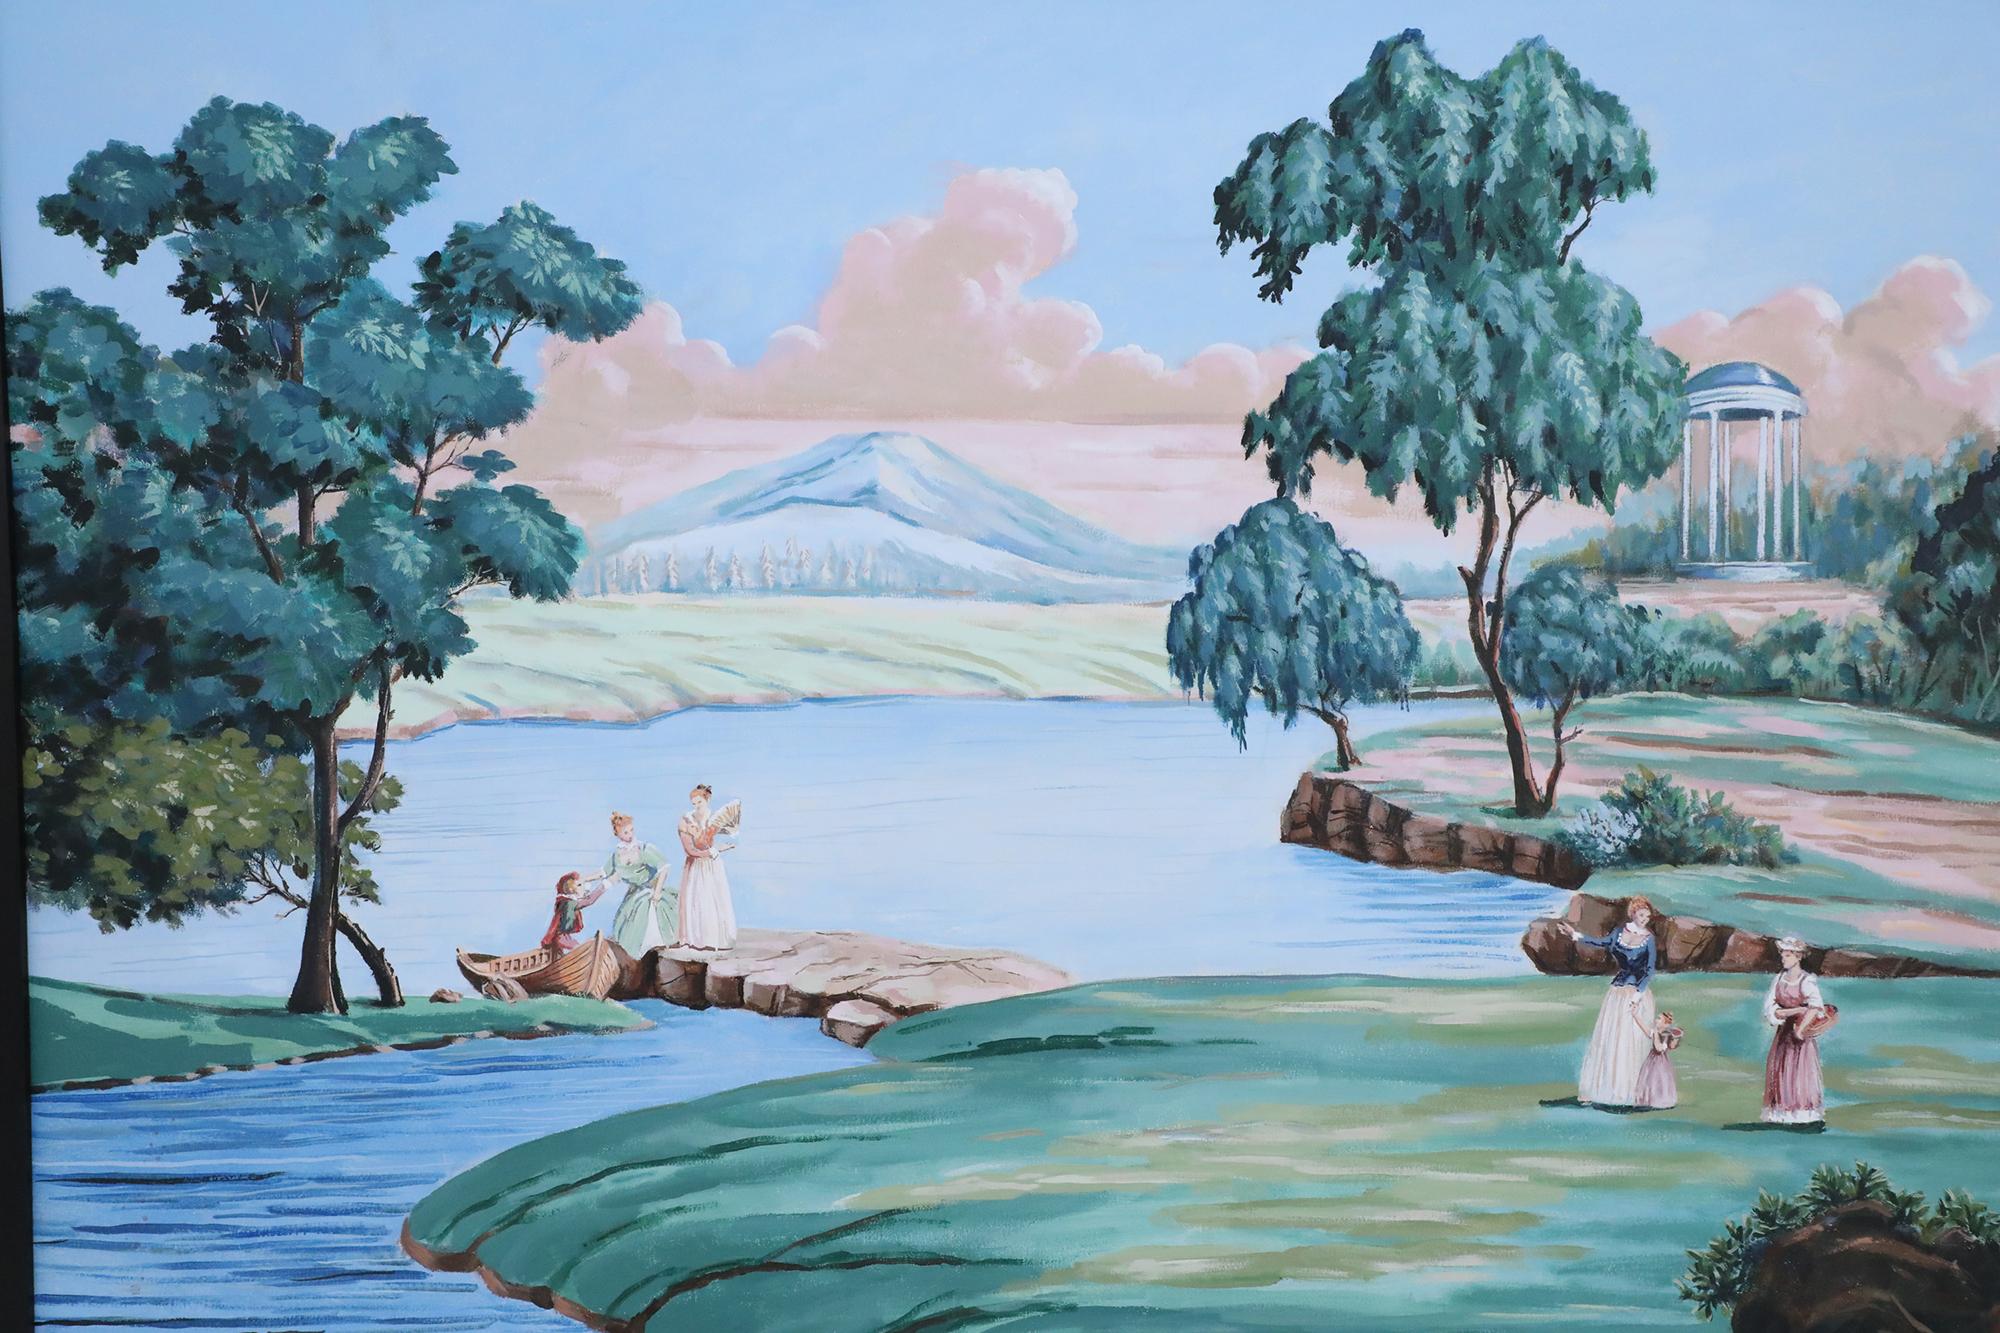 French Provincial-style (mid-20th century) oil on canvas painting depicting a pastoral scene of women and children next to a lake with mountains and a gazebo in the distance in a rectangular black painted wooden frame.